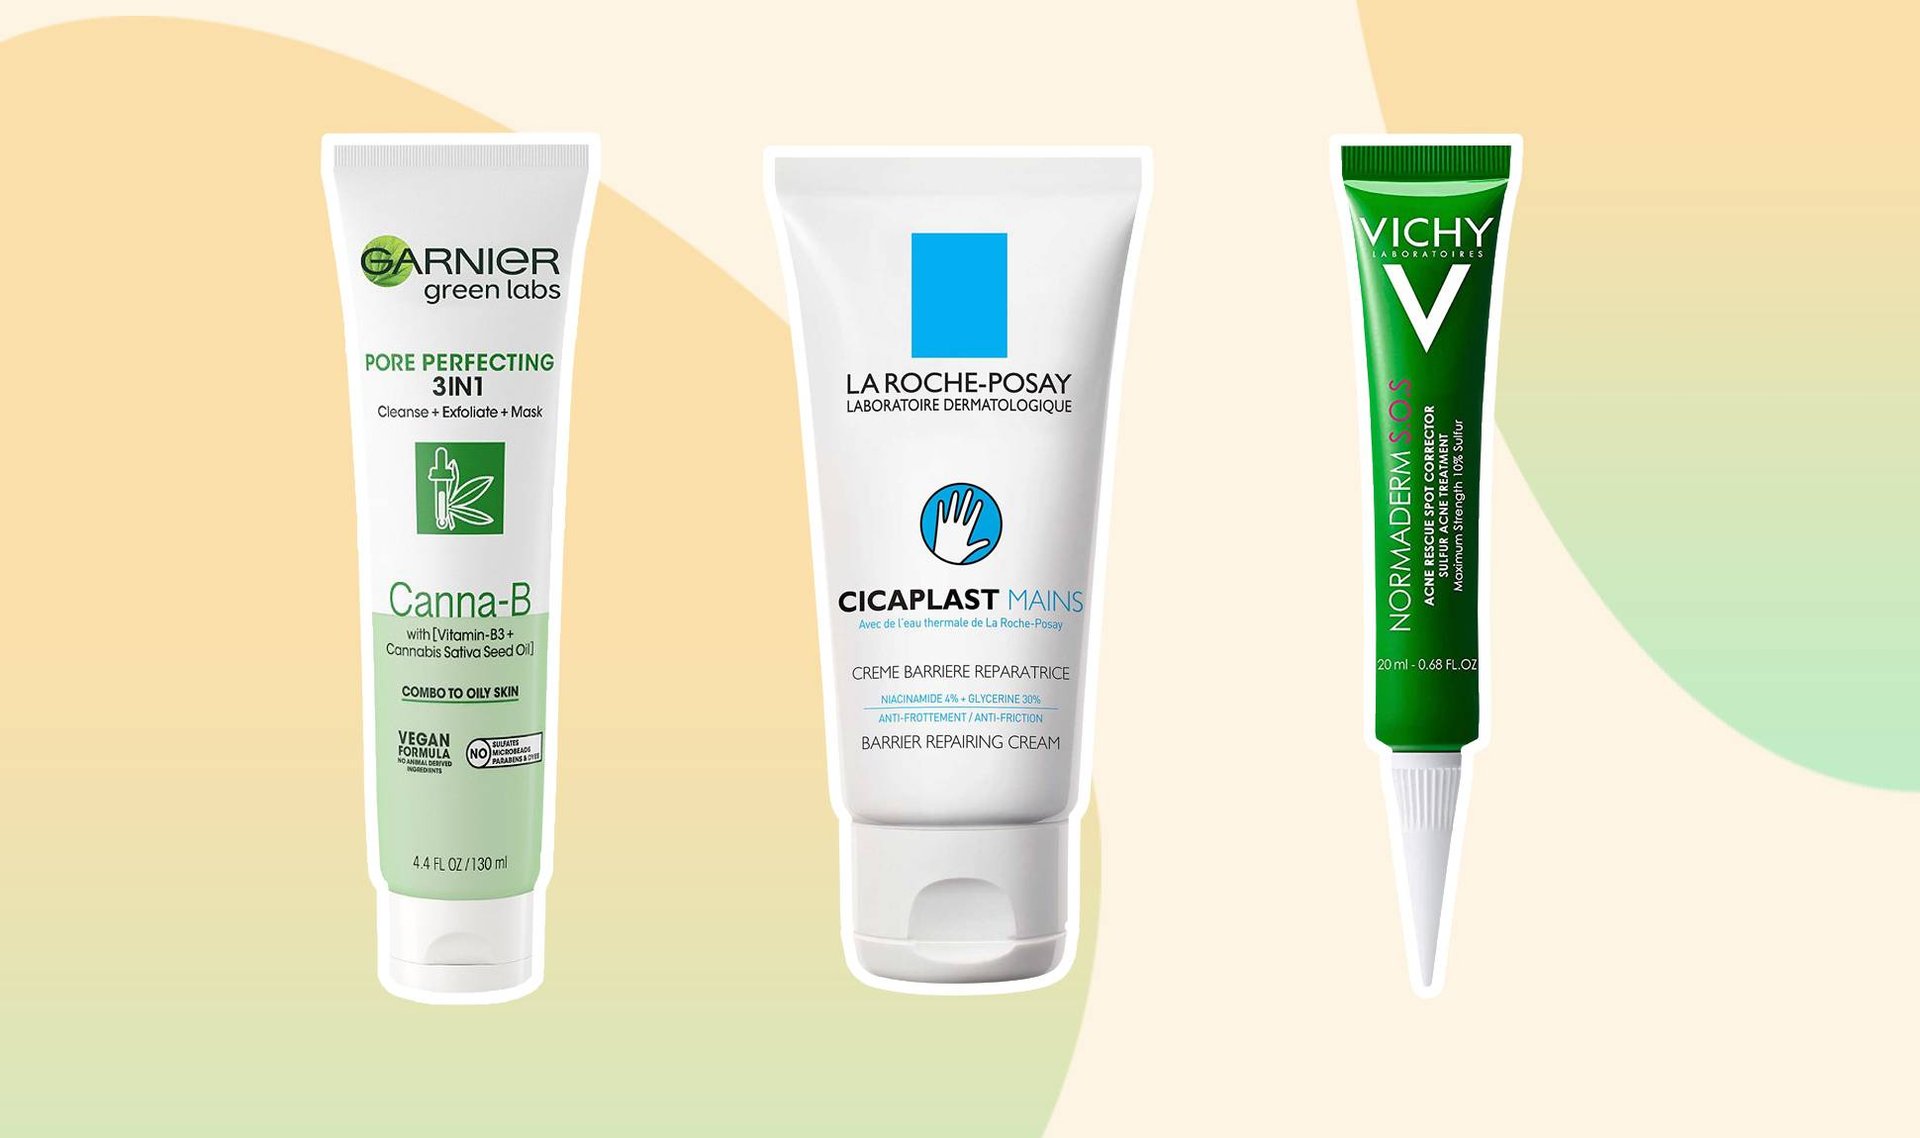 7 Skincare Products Under $25 to Refresh Your Routine on a Budget